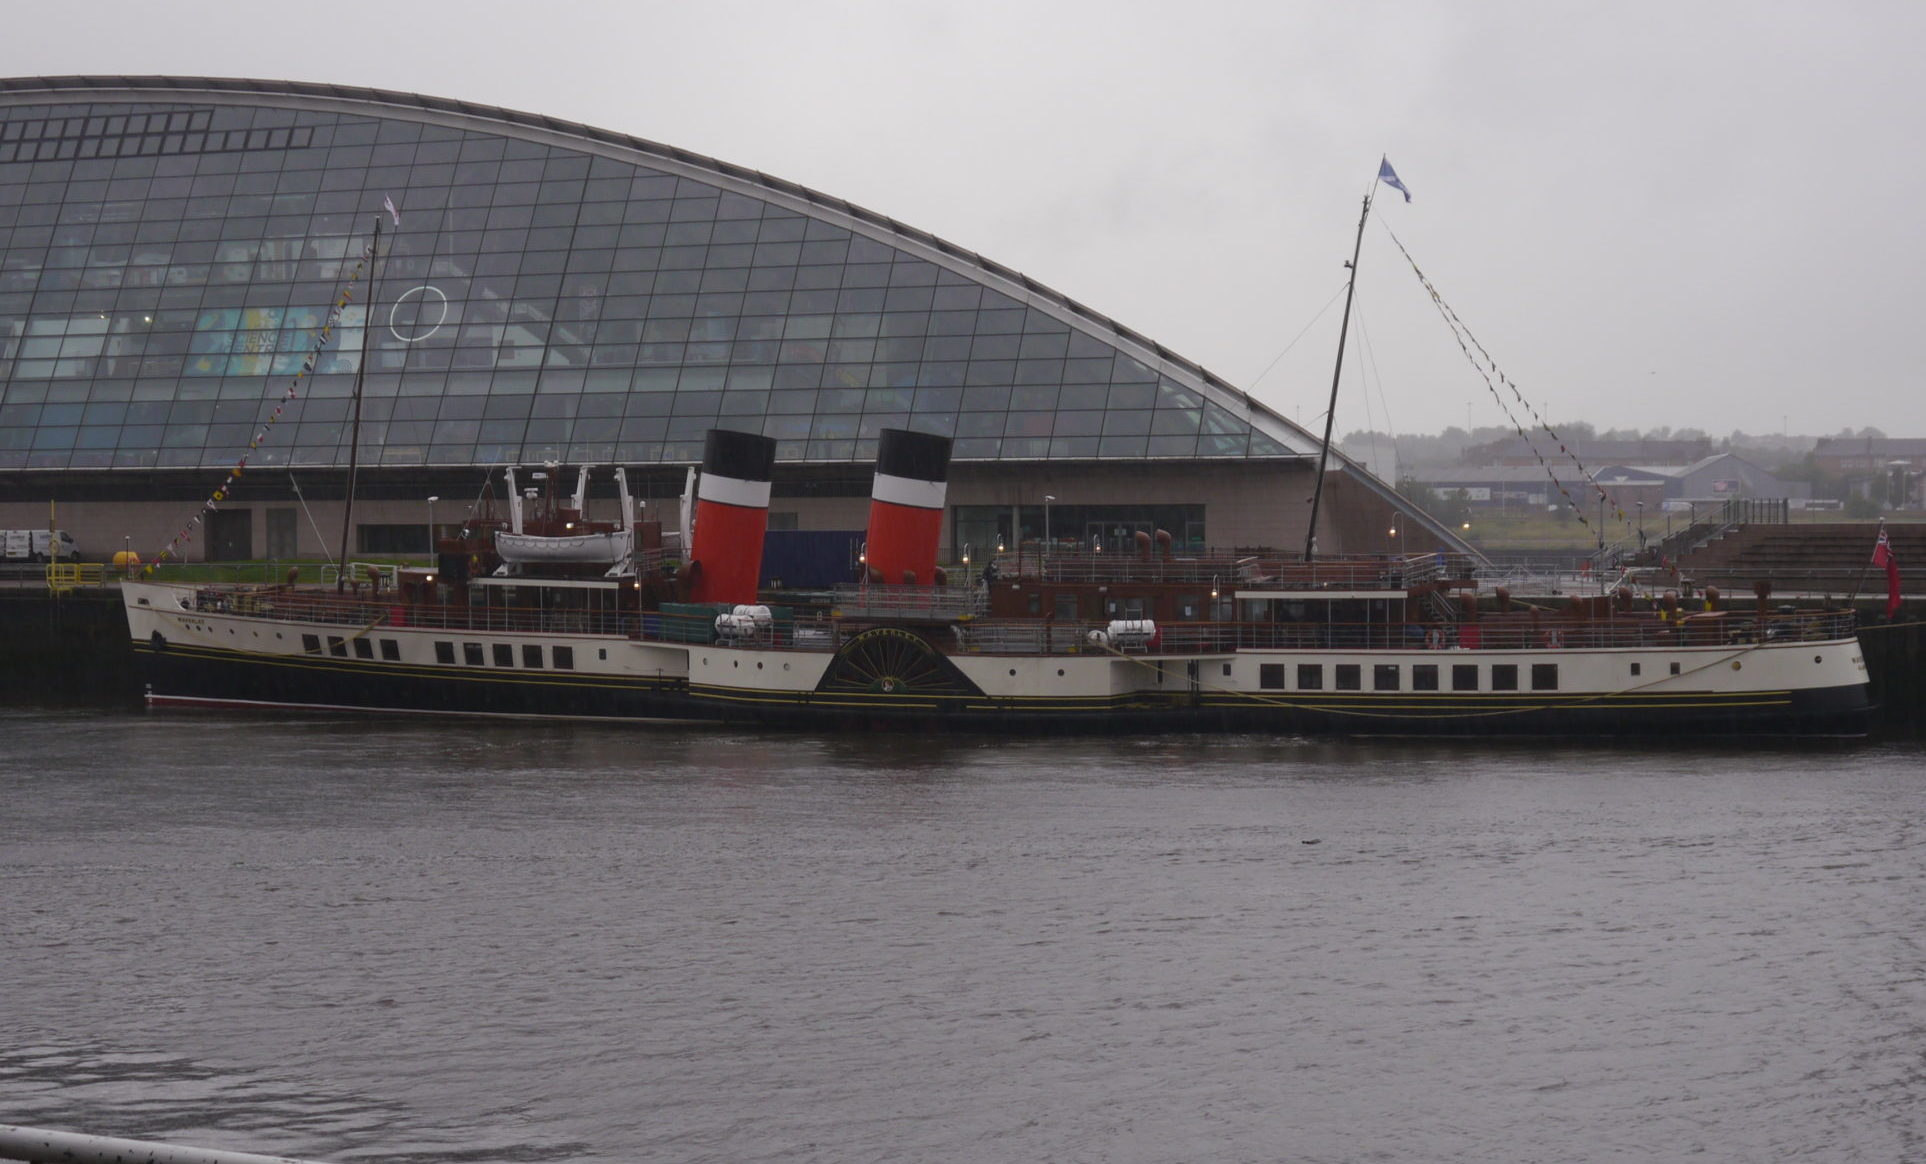 PS Waverley berthed at the Glasgow Science Centre on Friday morning